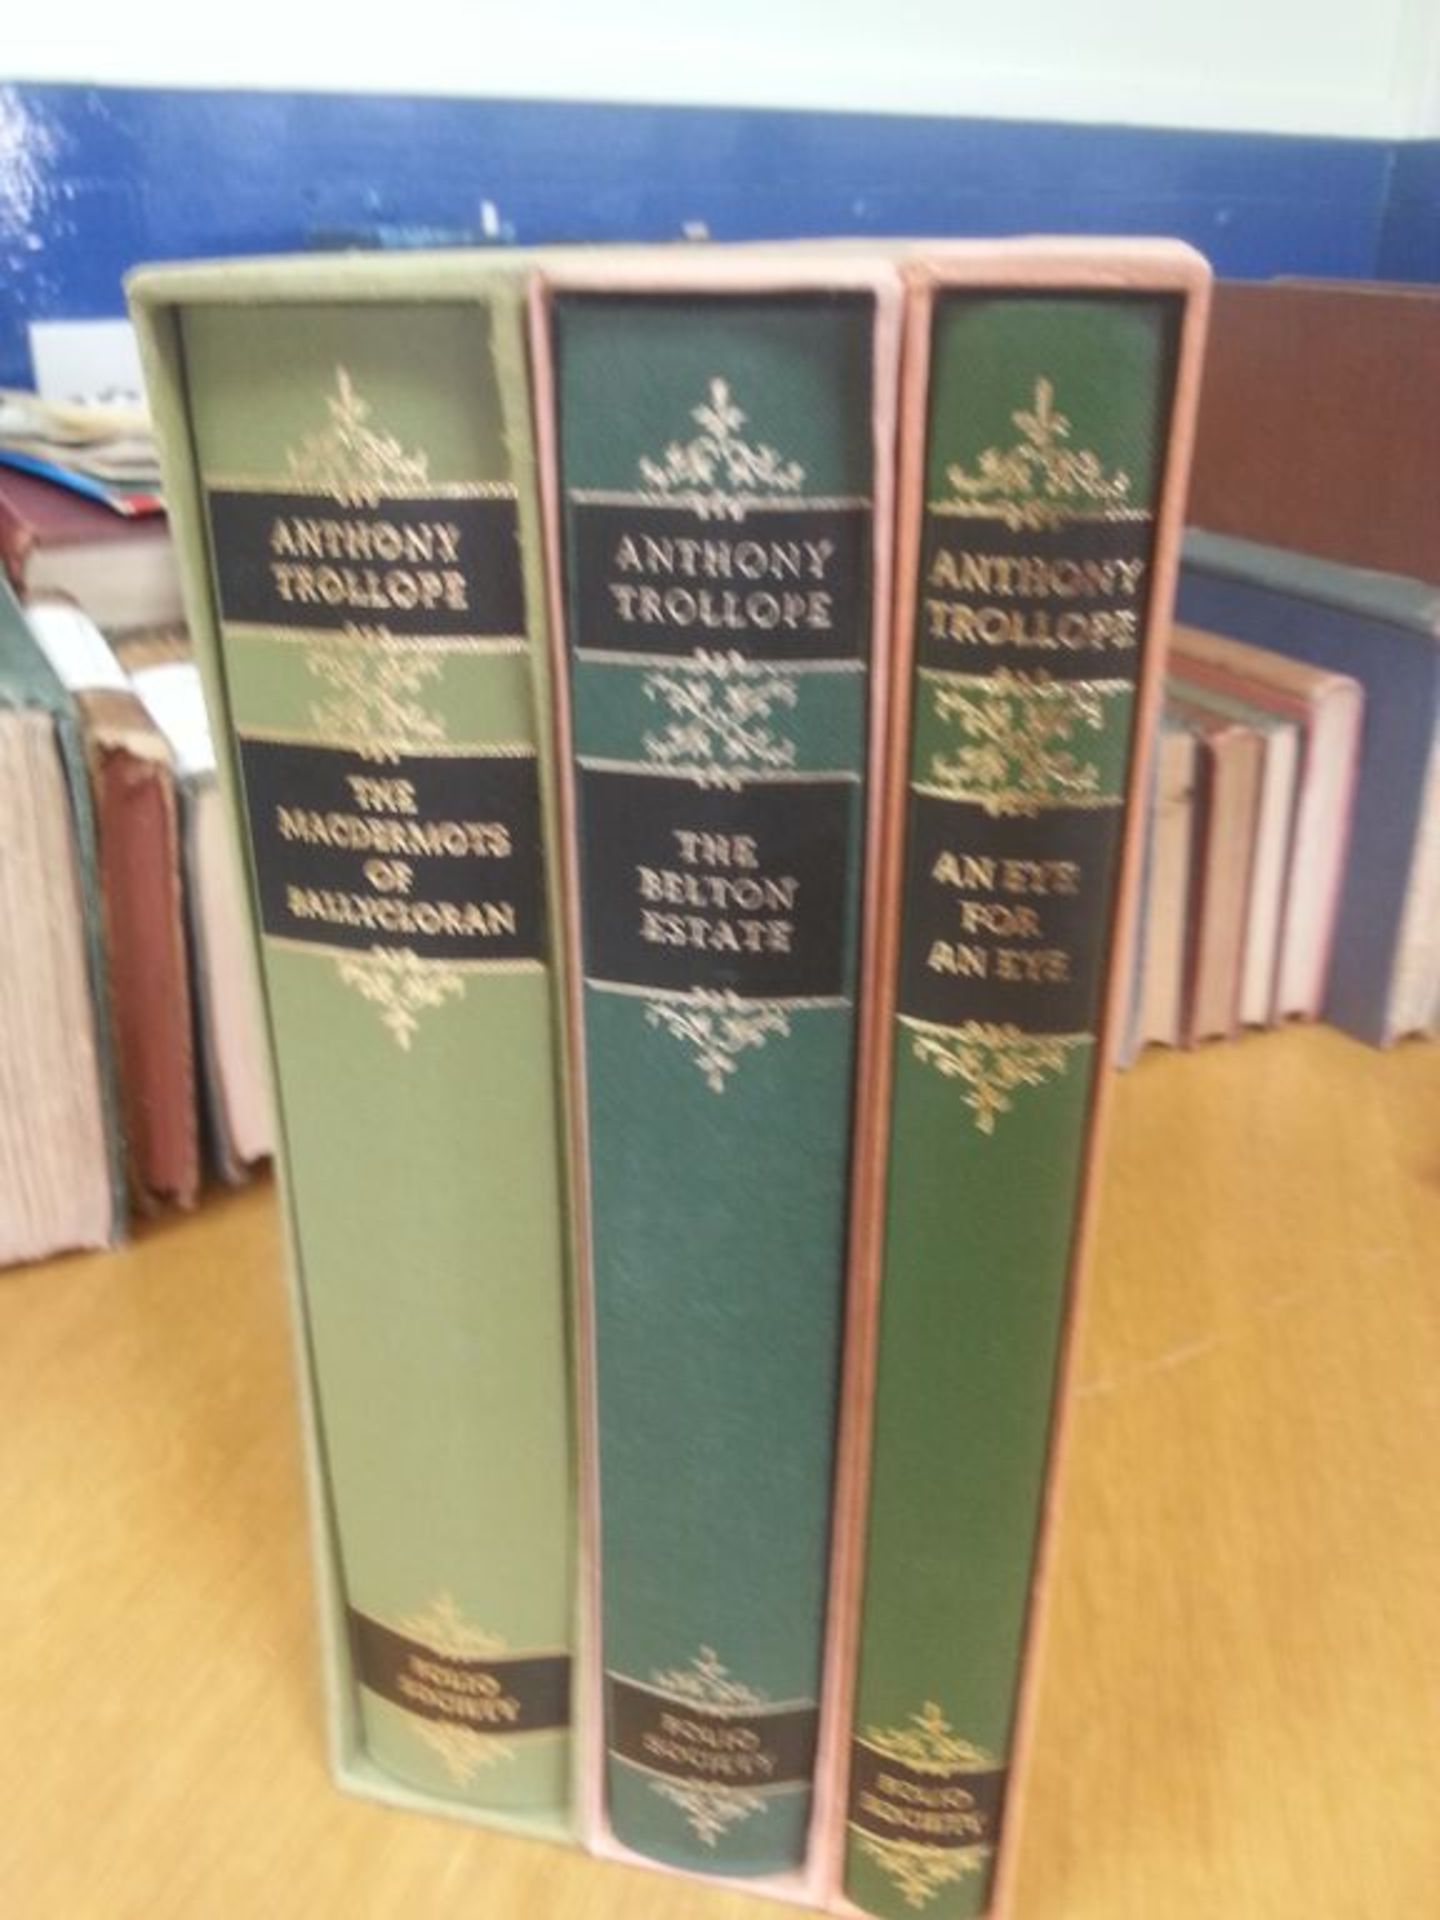 Set of 3 Books by Anthony Trollope, Published by The Folio Society  : The Macdermots of Ballycloran,